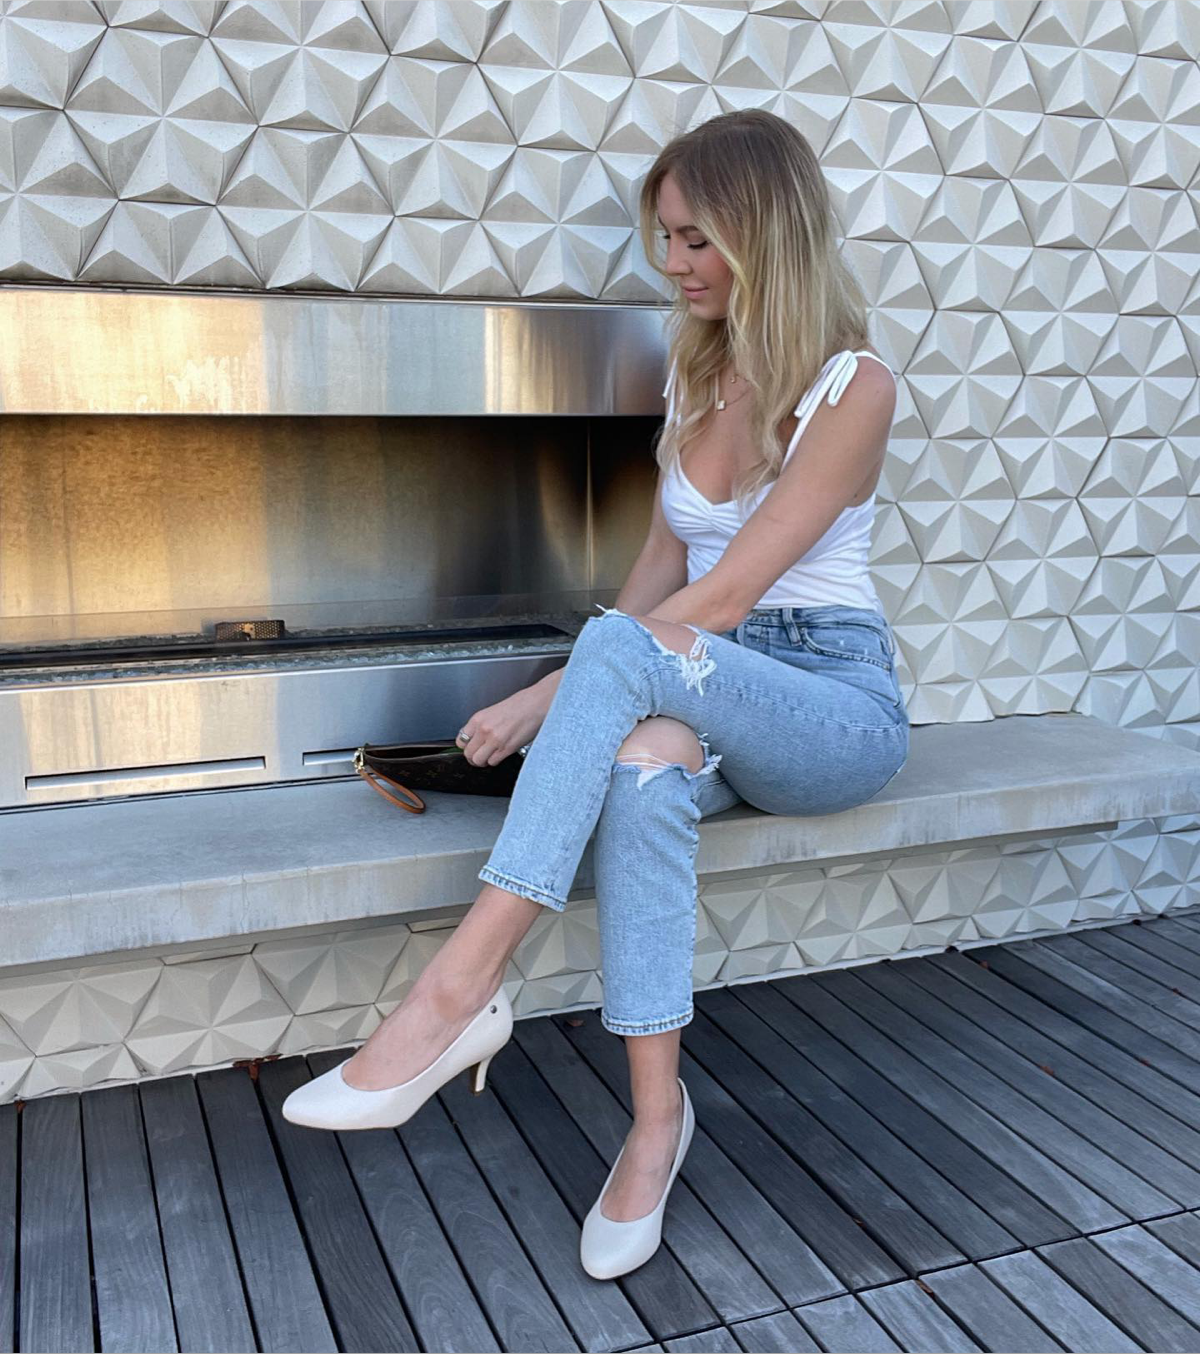 Influencer @_alexaschmitz styles the LifeStride Parigi pump in almond milk with ripped skinny jeans and a dressy white tank top next to an outdoor fireplace.